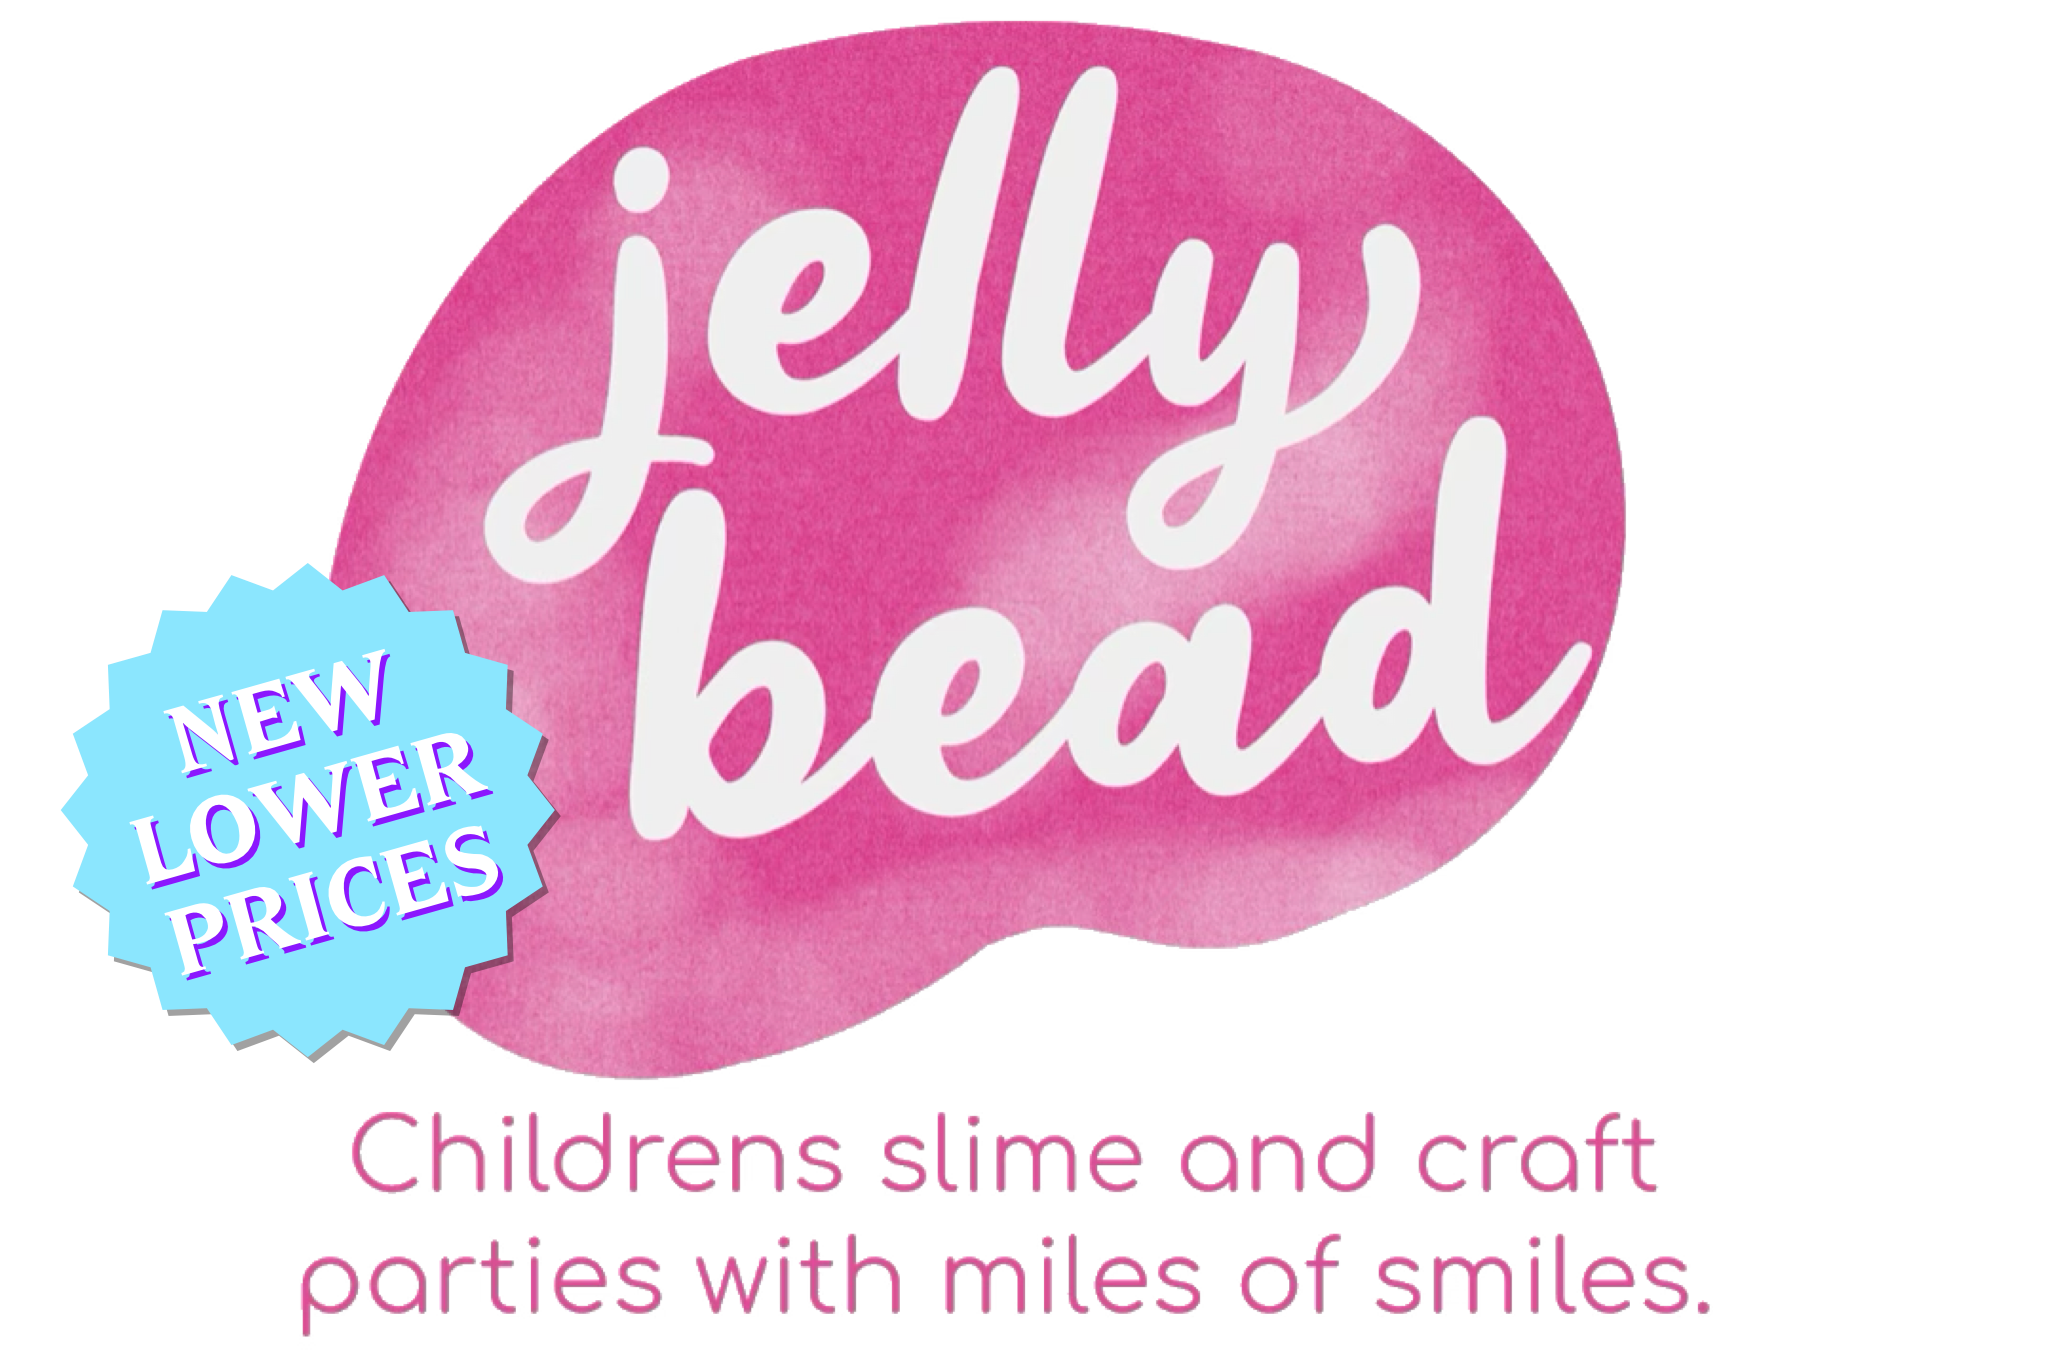 Jelly bead childrens Slime and Craft parties and workshops